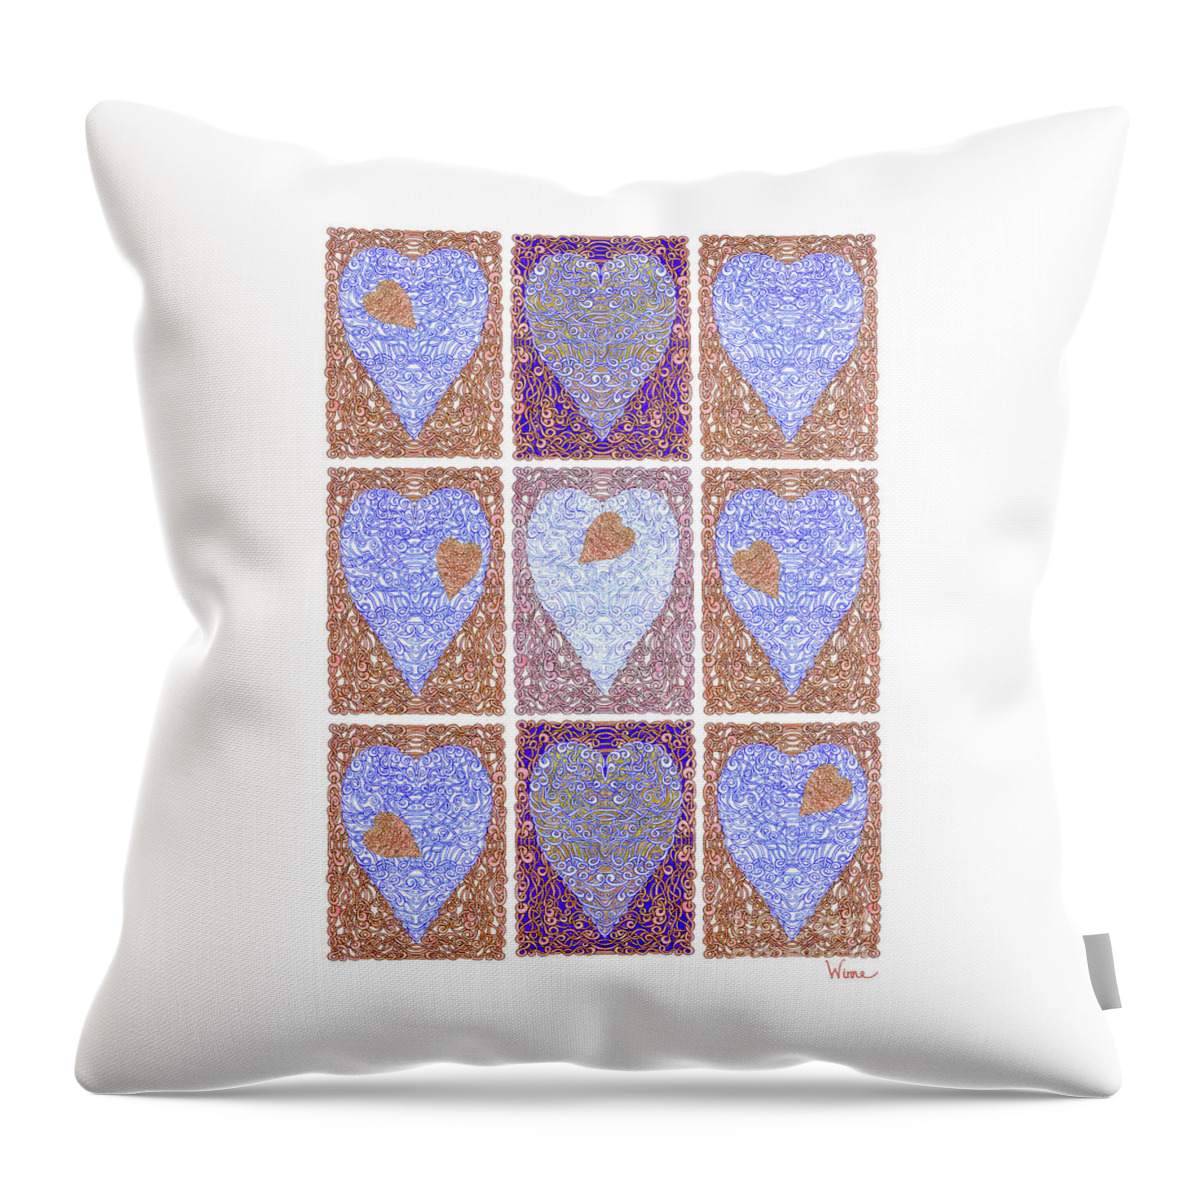 Lise Winne Throw Pillow featuring the digital art Hearts Within Hearts In Copper and Blue by Lise Winne